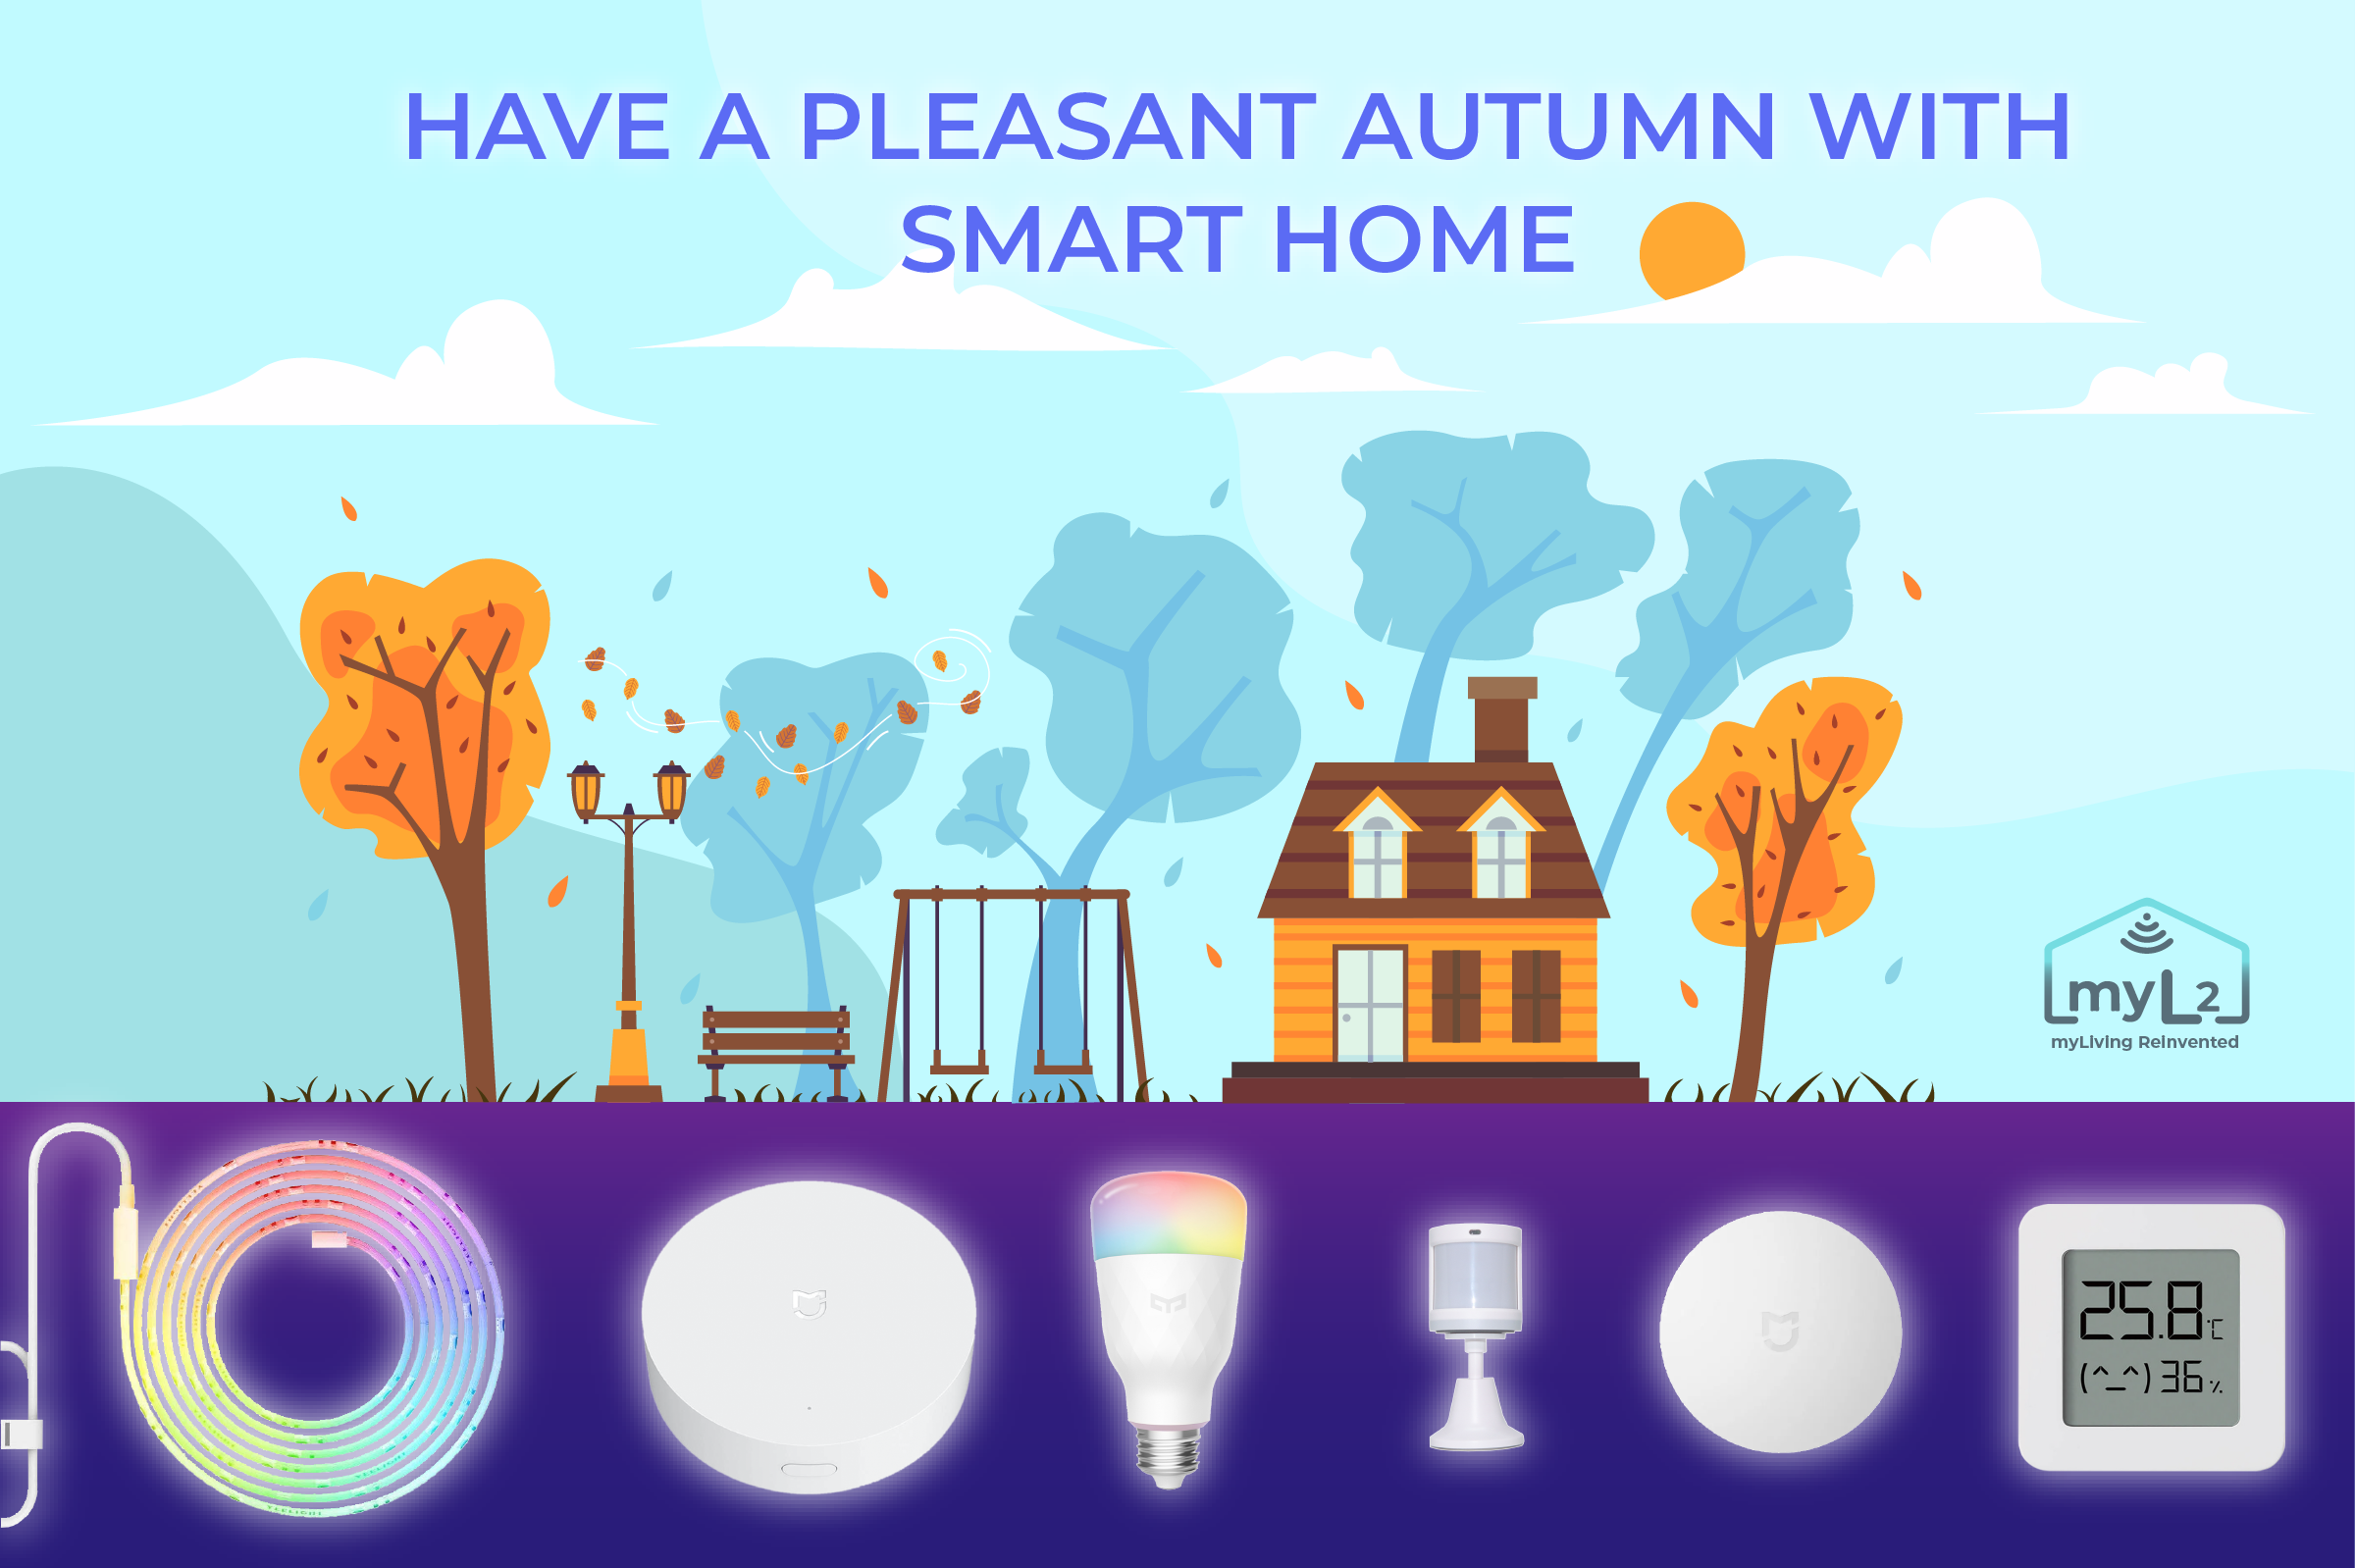 3 ways your Smart Home can make your autumn more pleasant